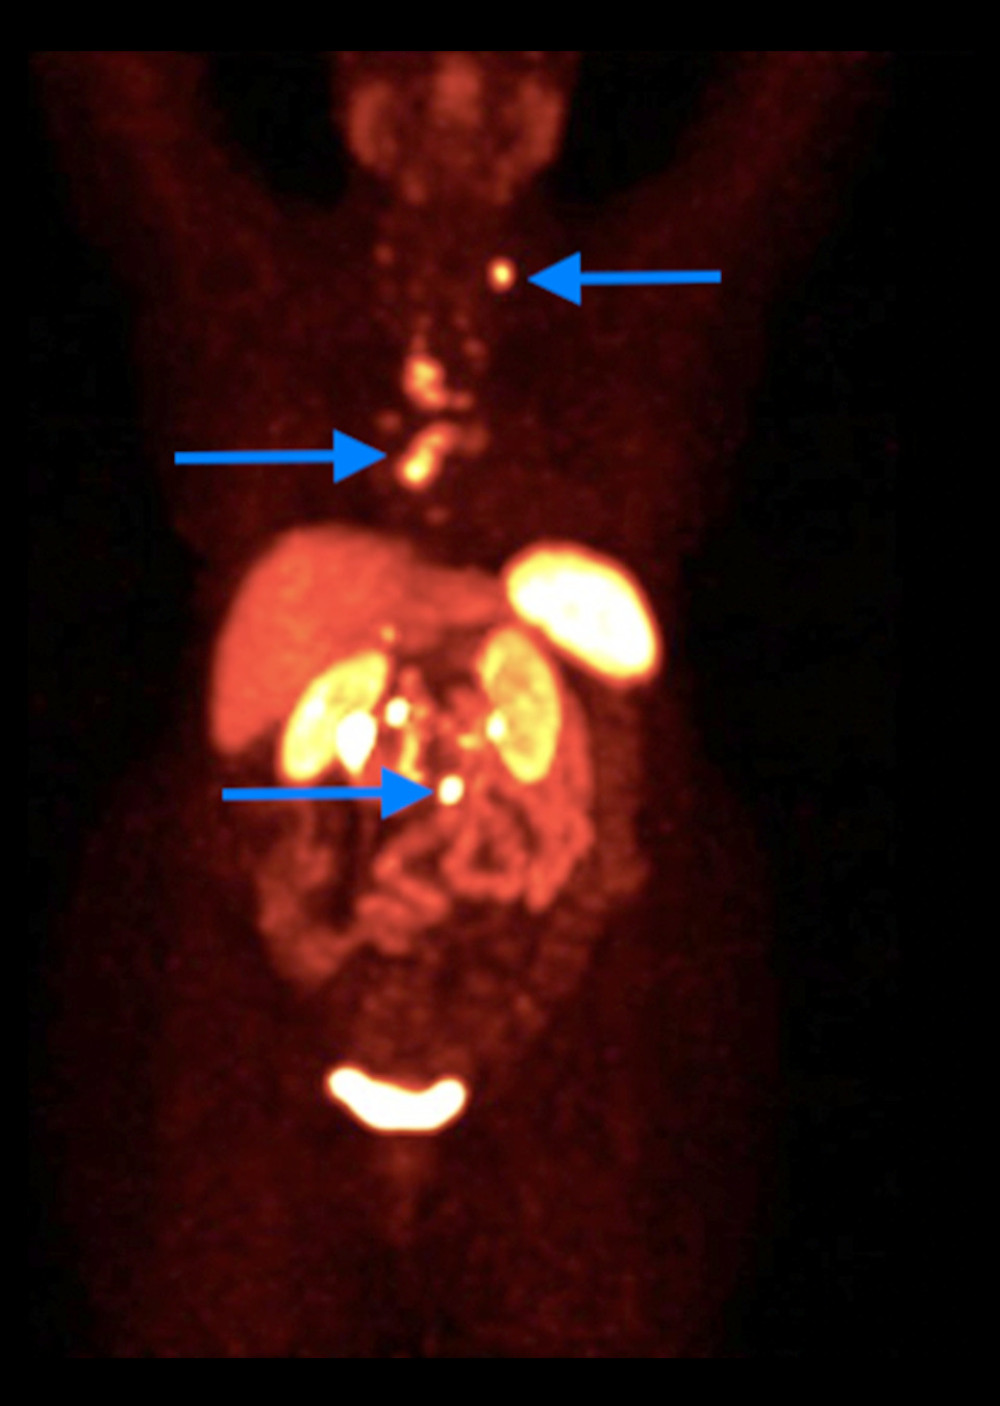 Dotatate PET/CT on December 11, 2019 showing the coronal view of the chest and abdomen without CT overlay. Metastatic uptake of dotatate is noted in parathyroid lymph nodes, mediastinum, intra-abdominal, and para-aortic lymph nodes. The arrows indicate areas of abnormal dotatate uptake, including areas of parathyroid lymph nodes, mediastinal lymph nodes, and para-aortic lymph nodes.